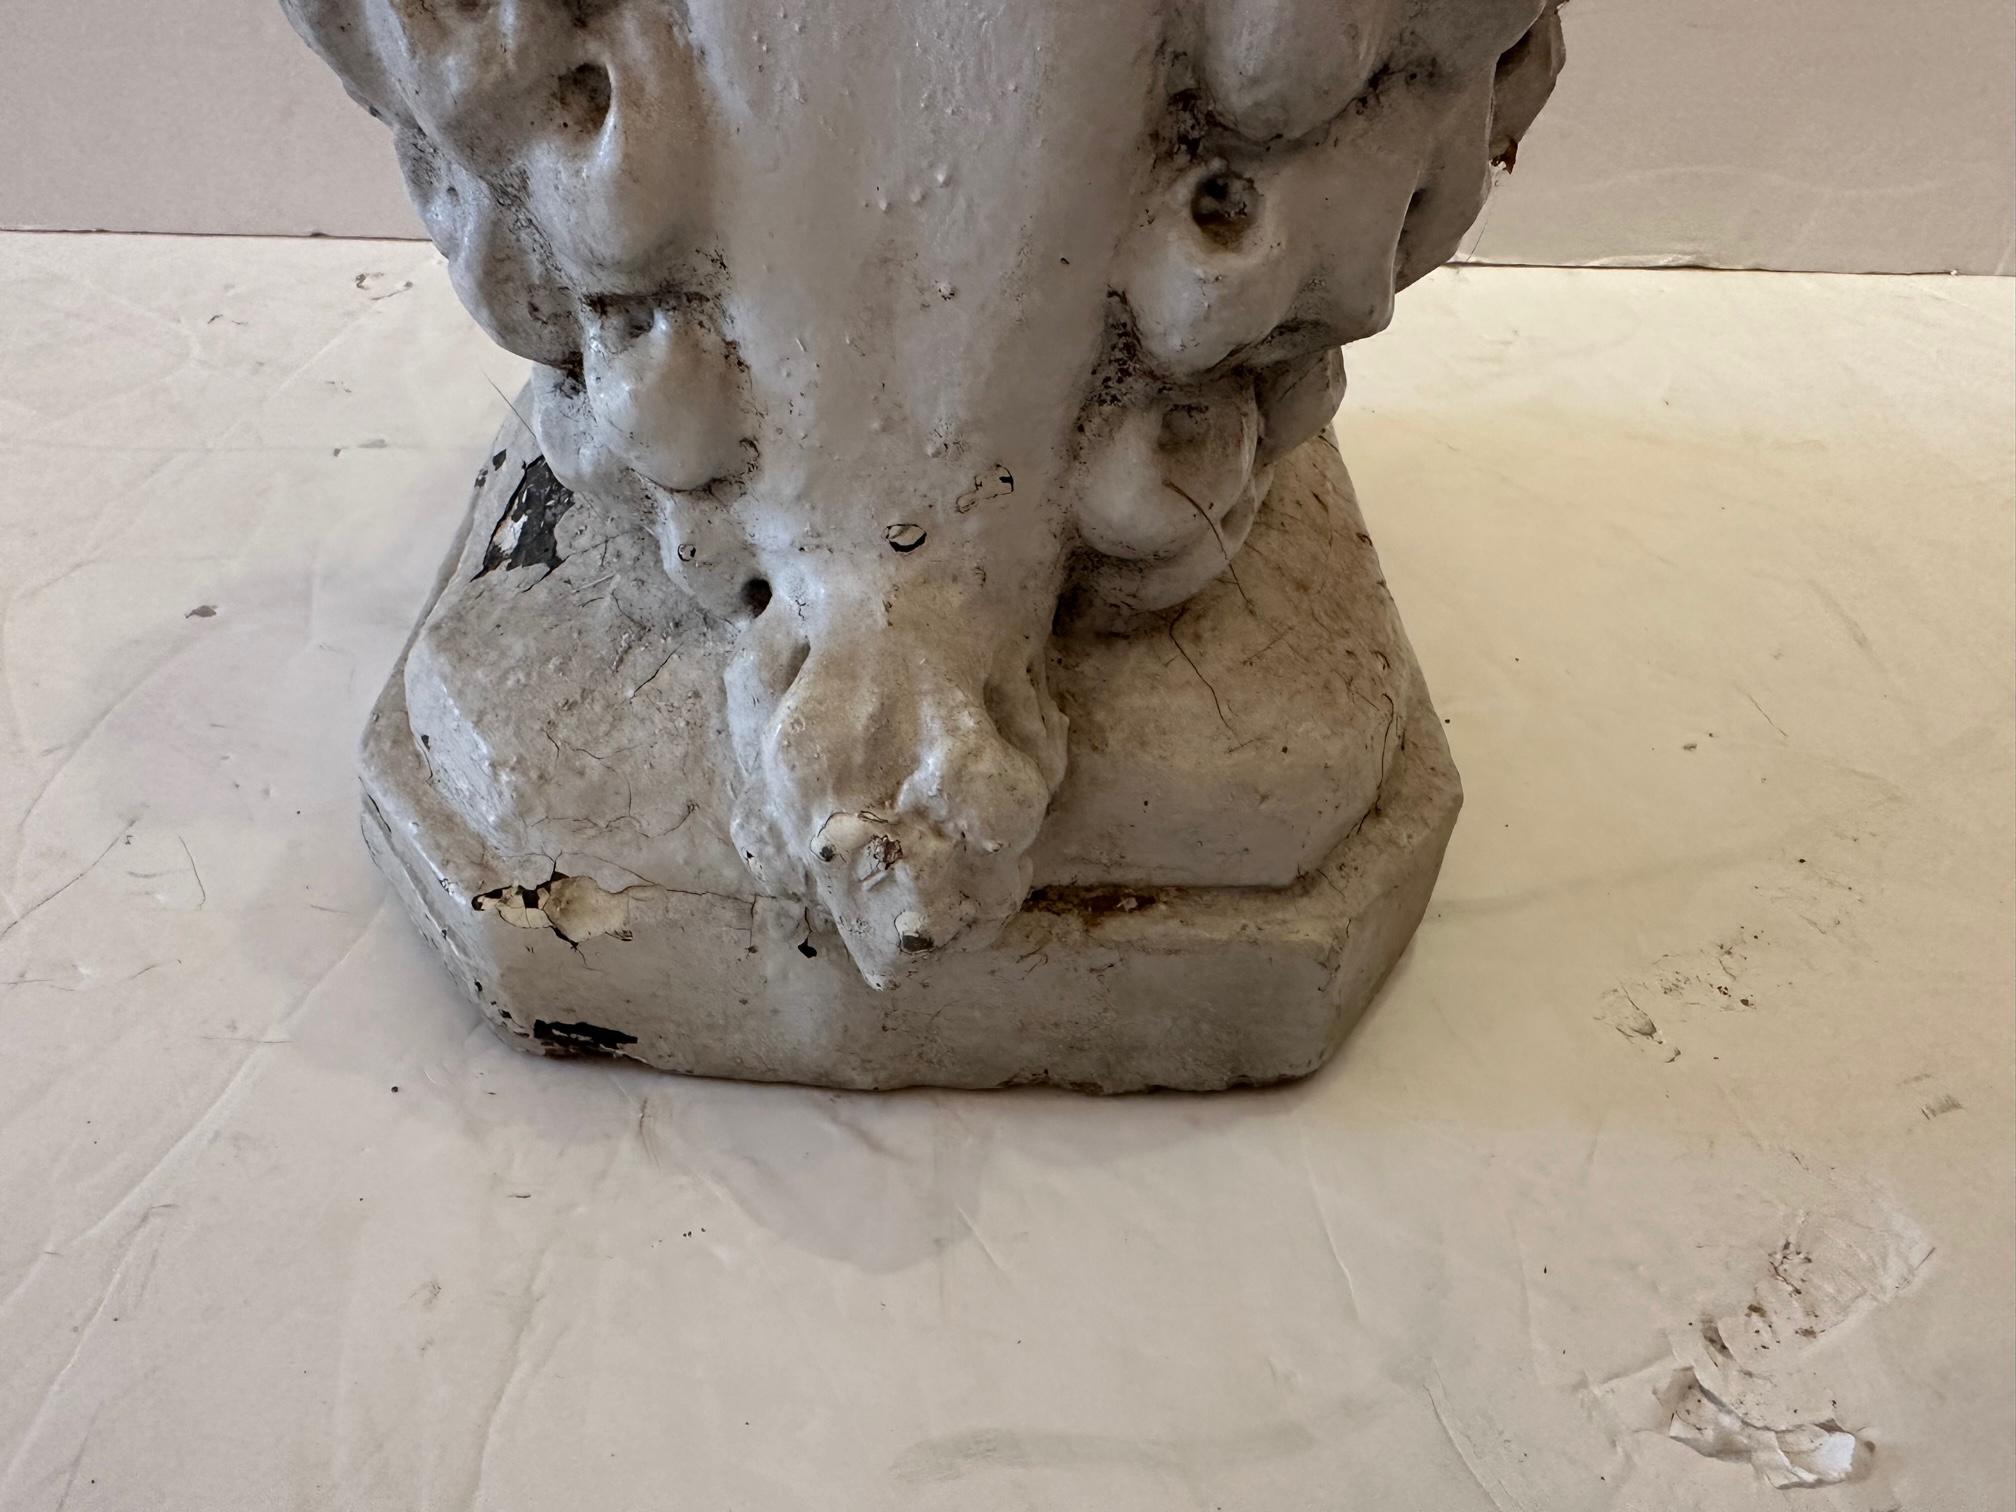 Darling sizeable cast stone cement white glazed poodle sculpture with slightly distressed patina. Great in the garden or inside.